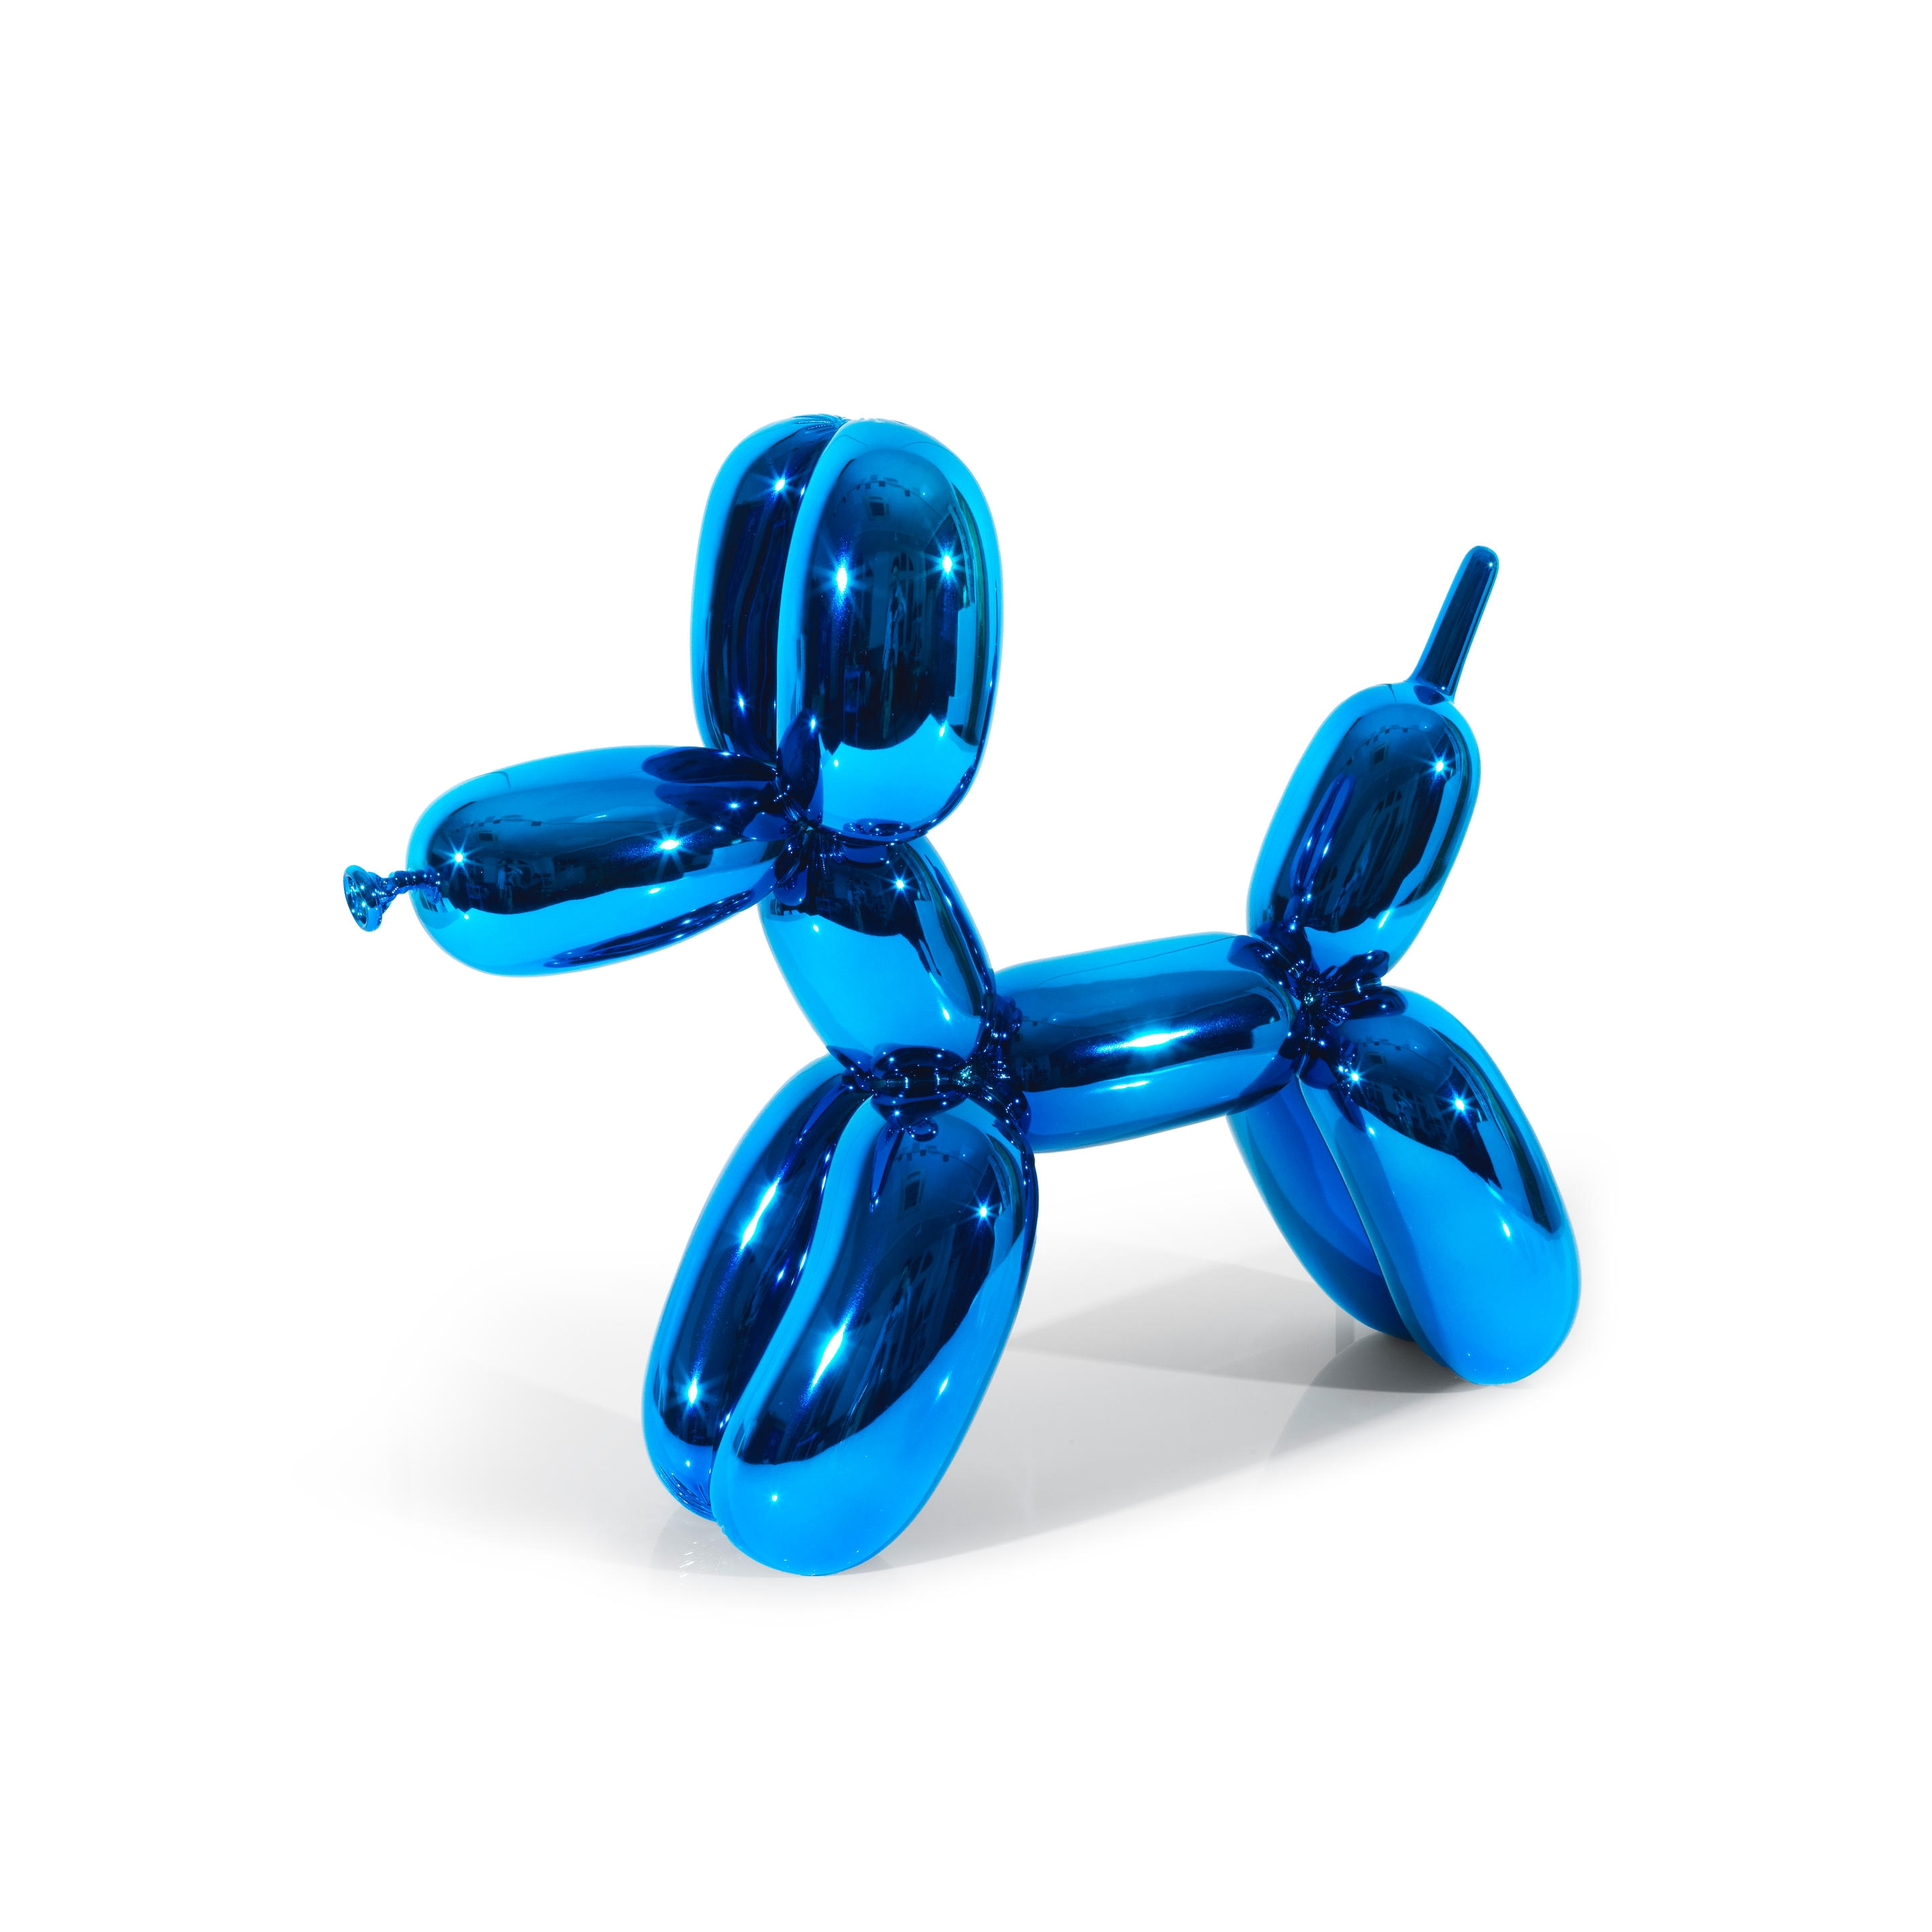 Artwork by Jeff Koons, Balloon dog (Blue), 2021, Made of sculpture